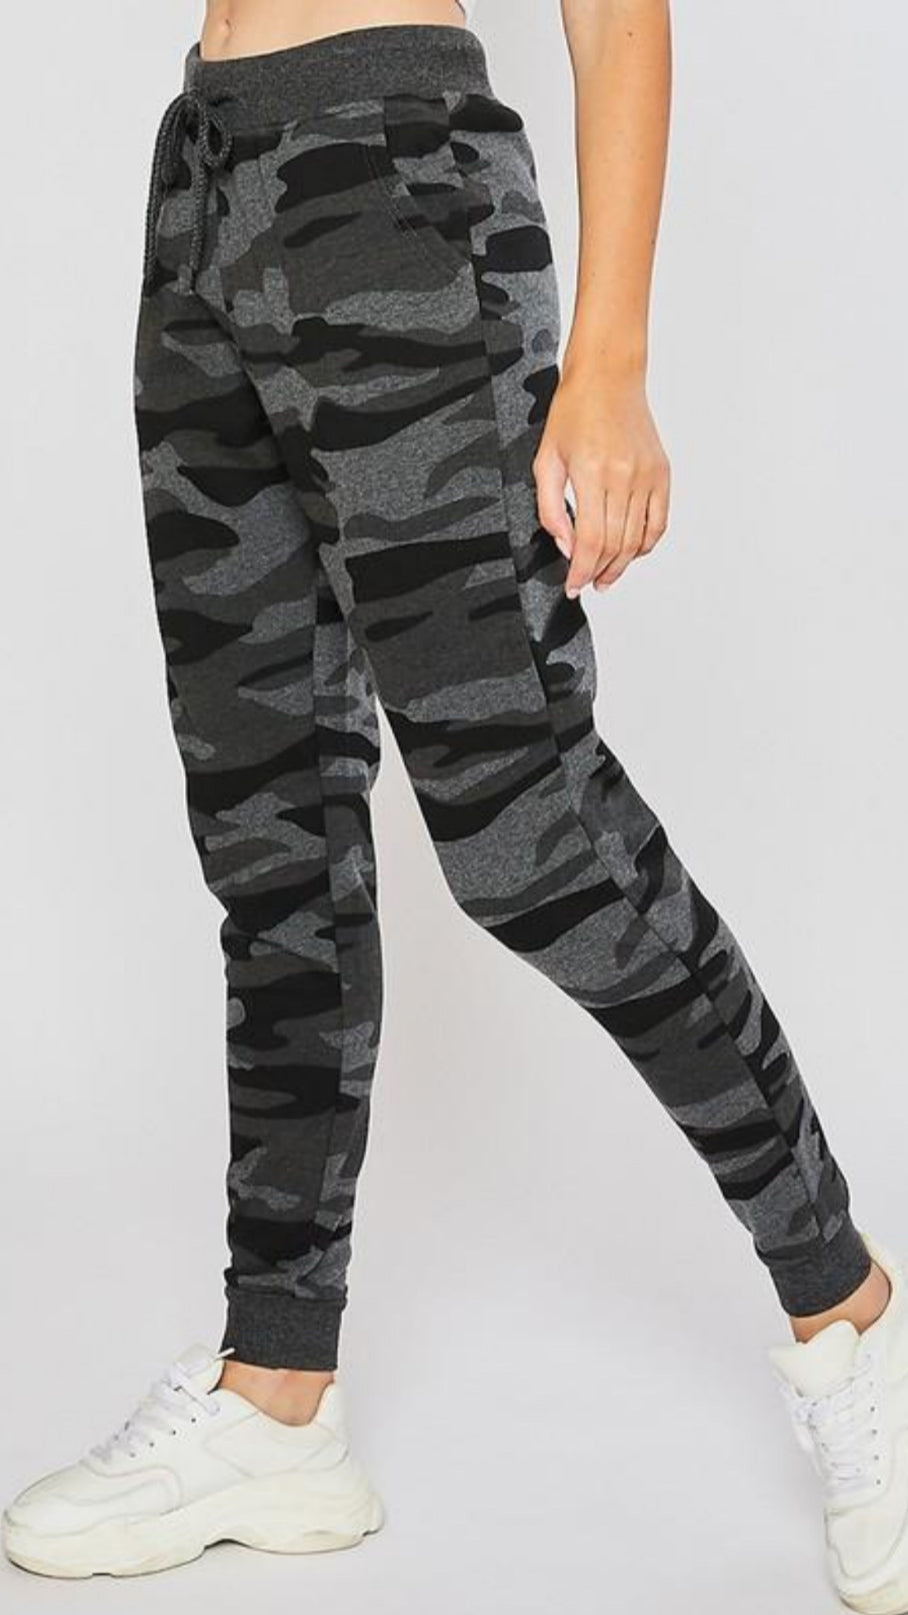 Relaxed Fit Jogger - Charcoal Camo.